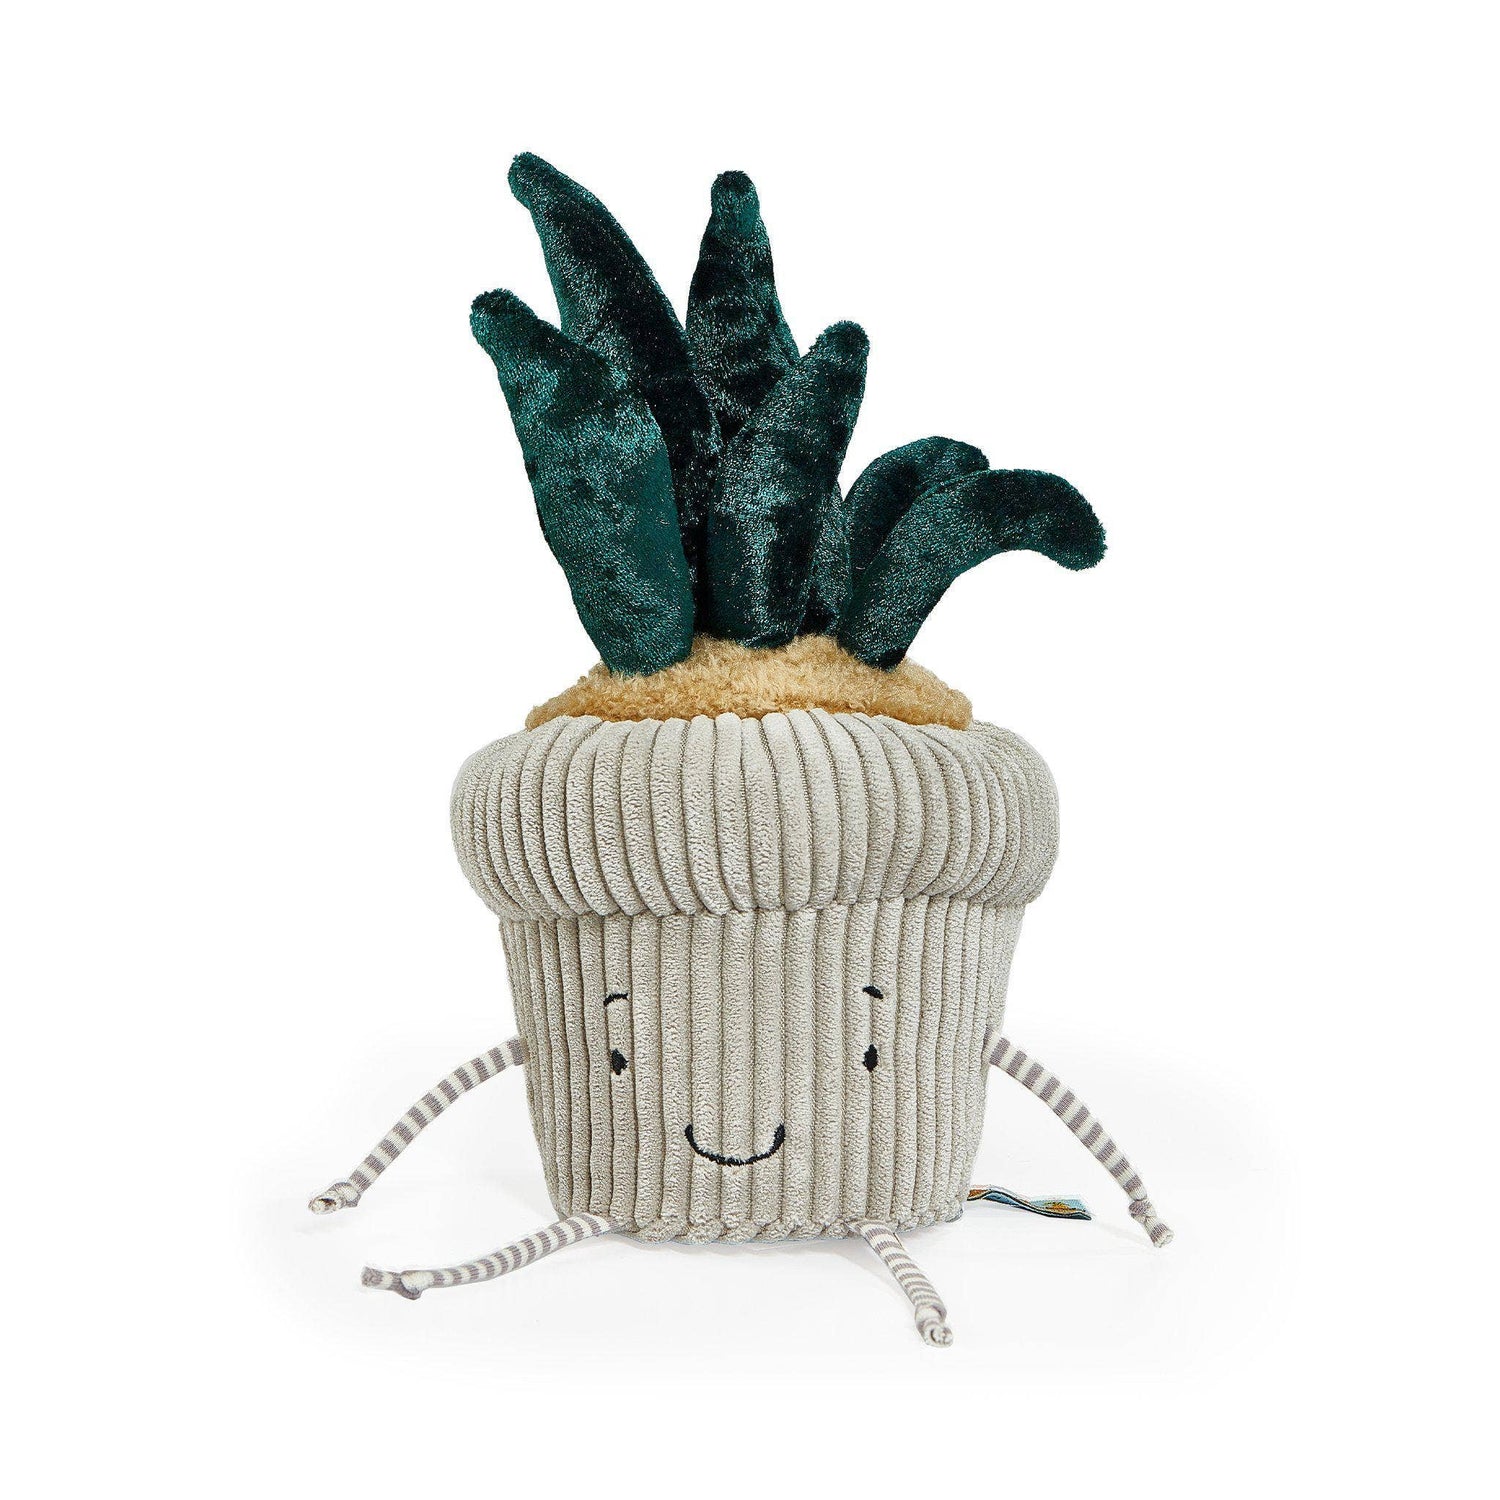 Snake Plant stuffed animal plush with gray pot by Bunnies by the Bay